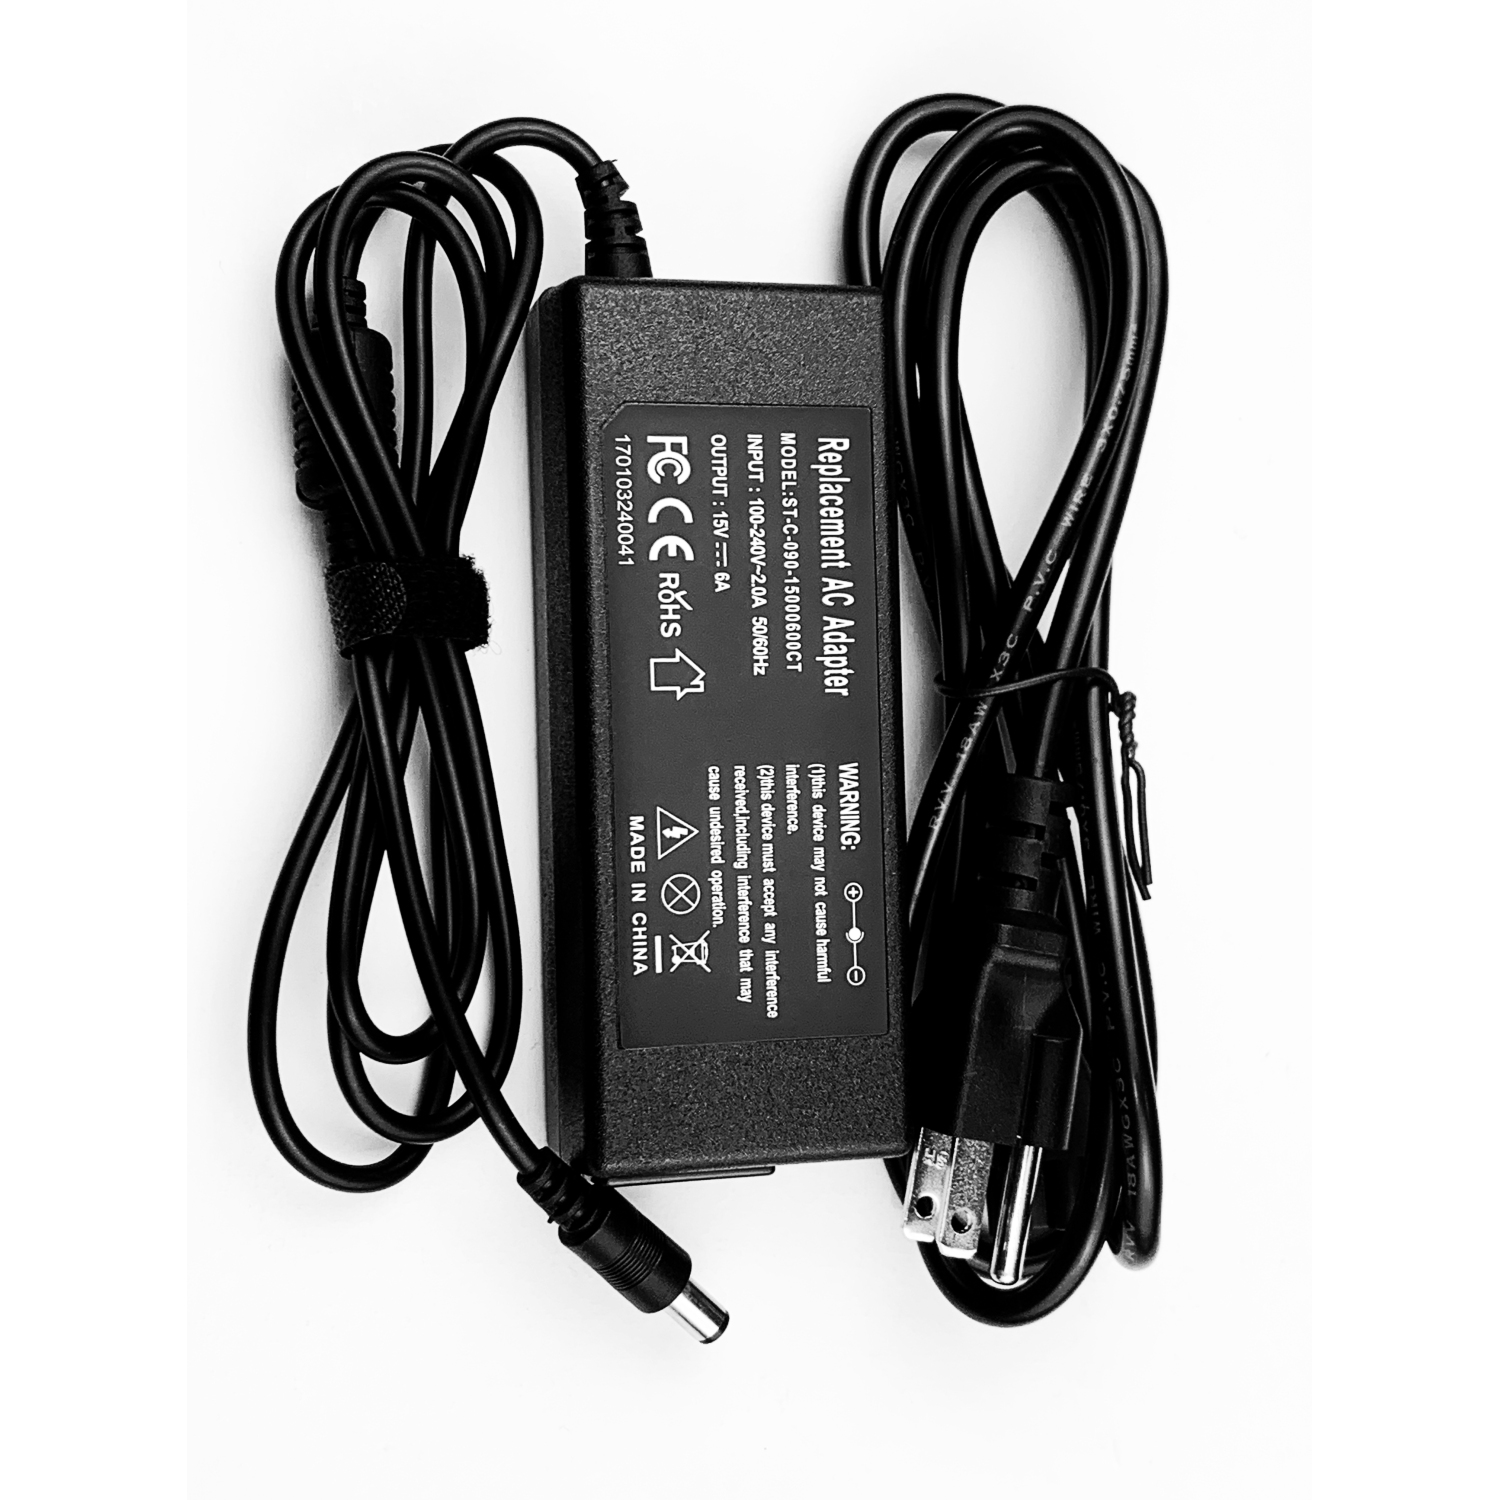 15V 6A 90W AC adapter charger for Toshiba Satellite M50-MX5 P100-MA3